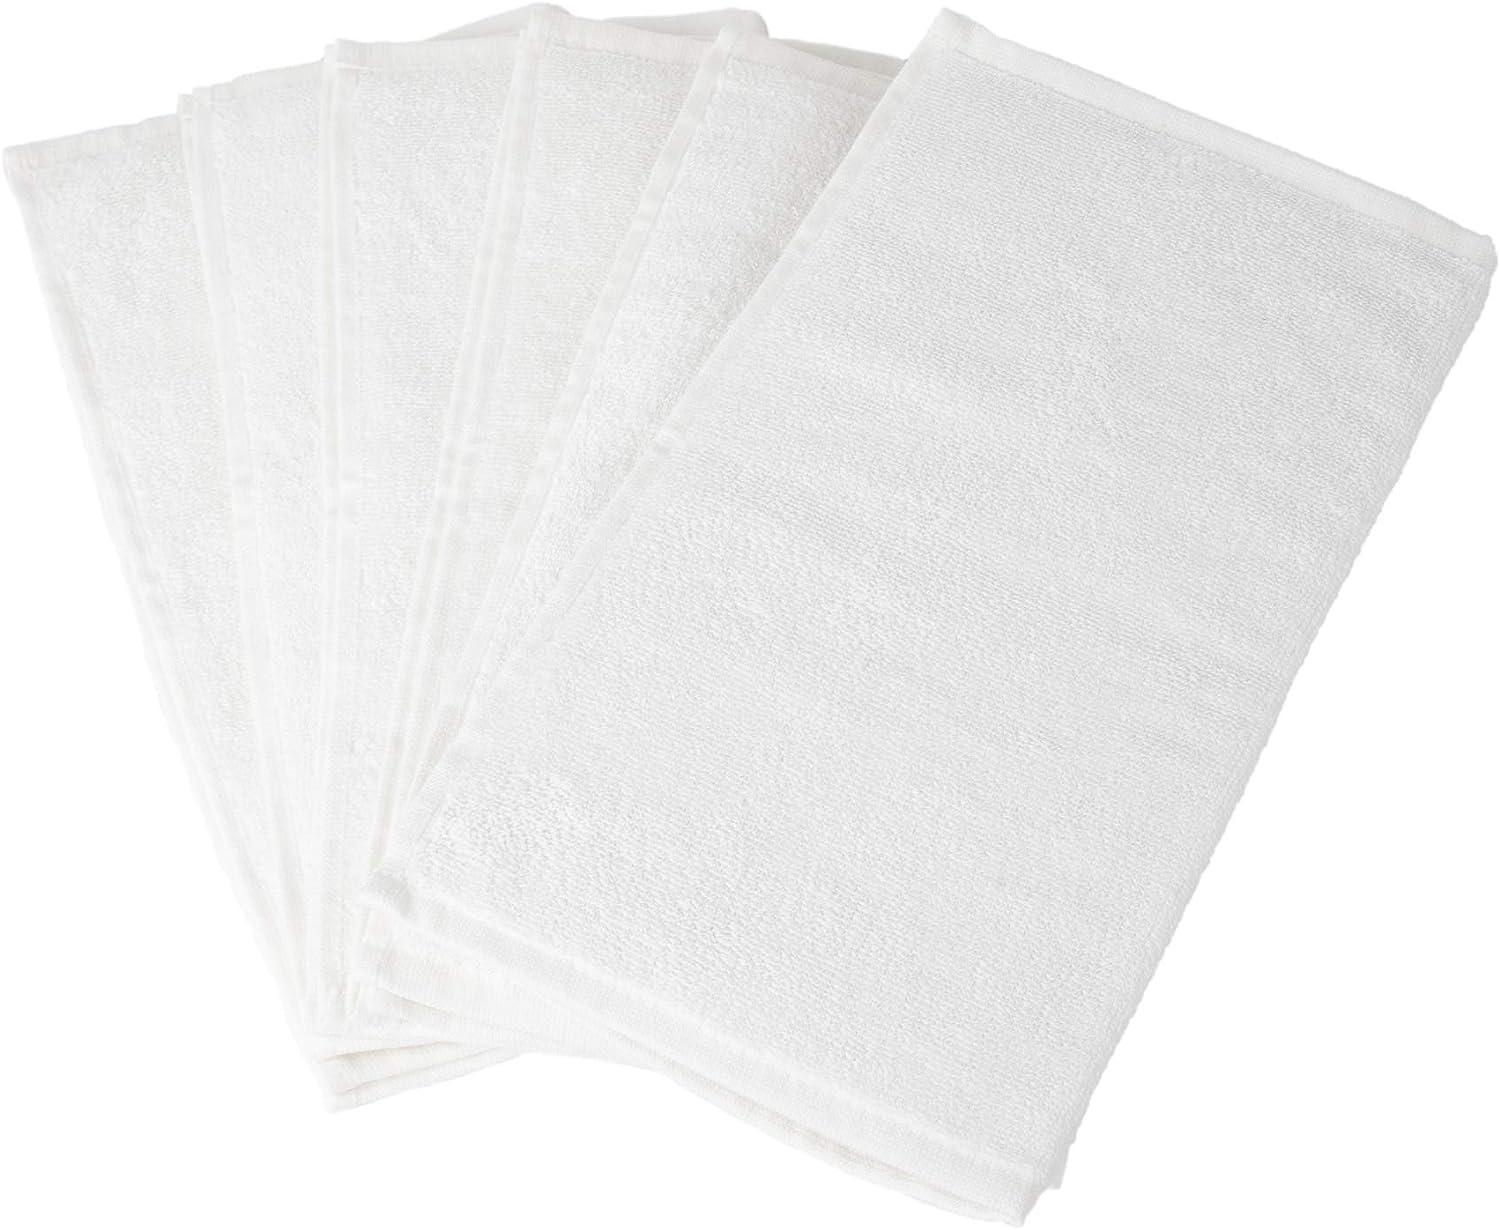 RosenSoft Oversized Wash Clothes-16x14 in Extra Large Wash Cloths for Body  and Face, Hand Gym Spa- Washcloth Towels for Bathroom, Bath Towel Set